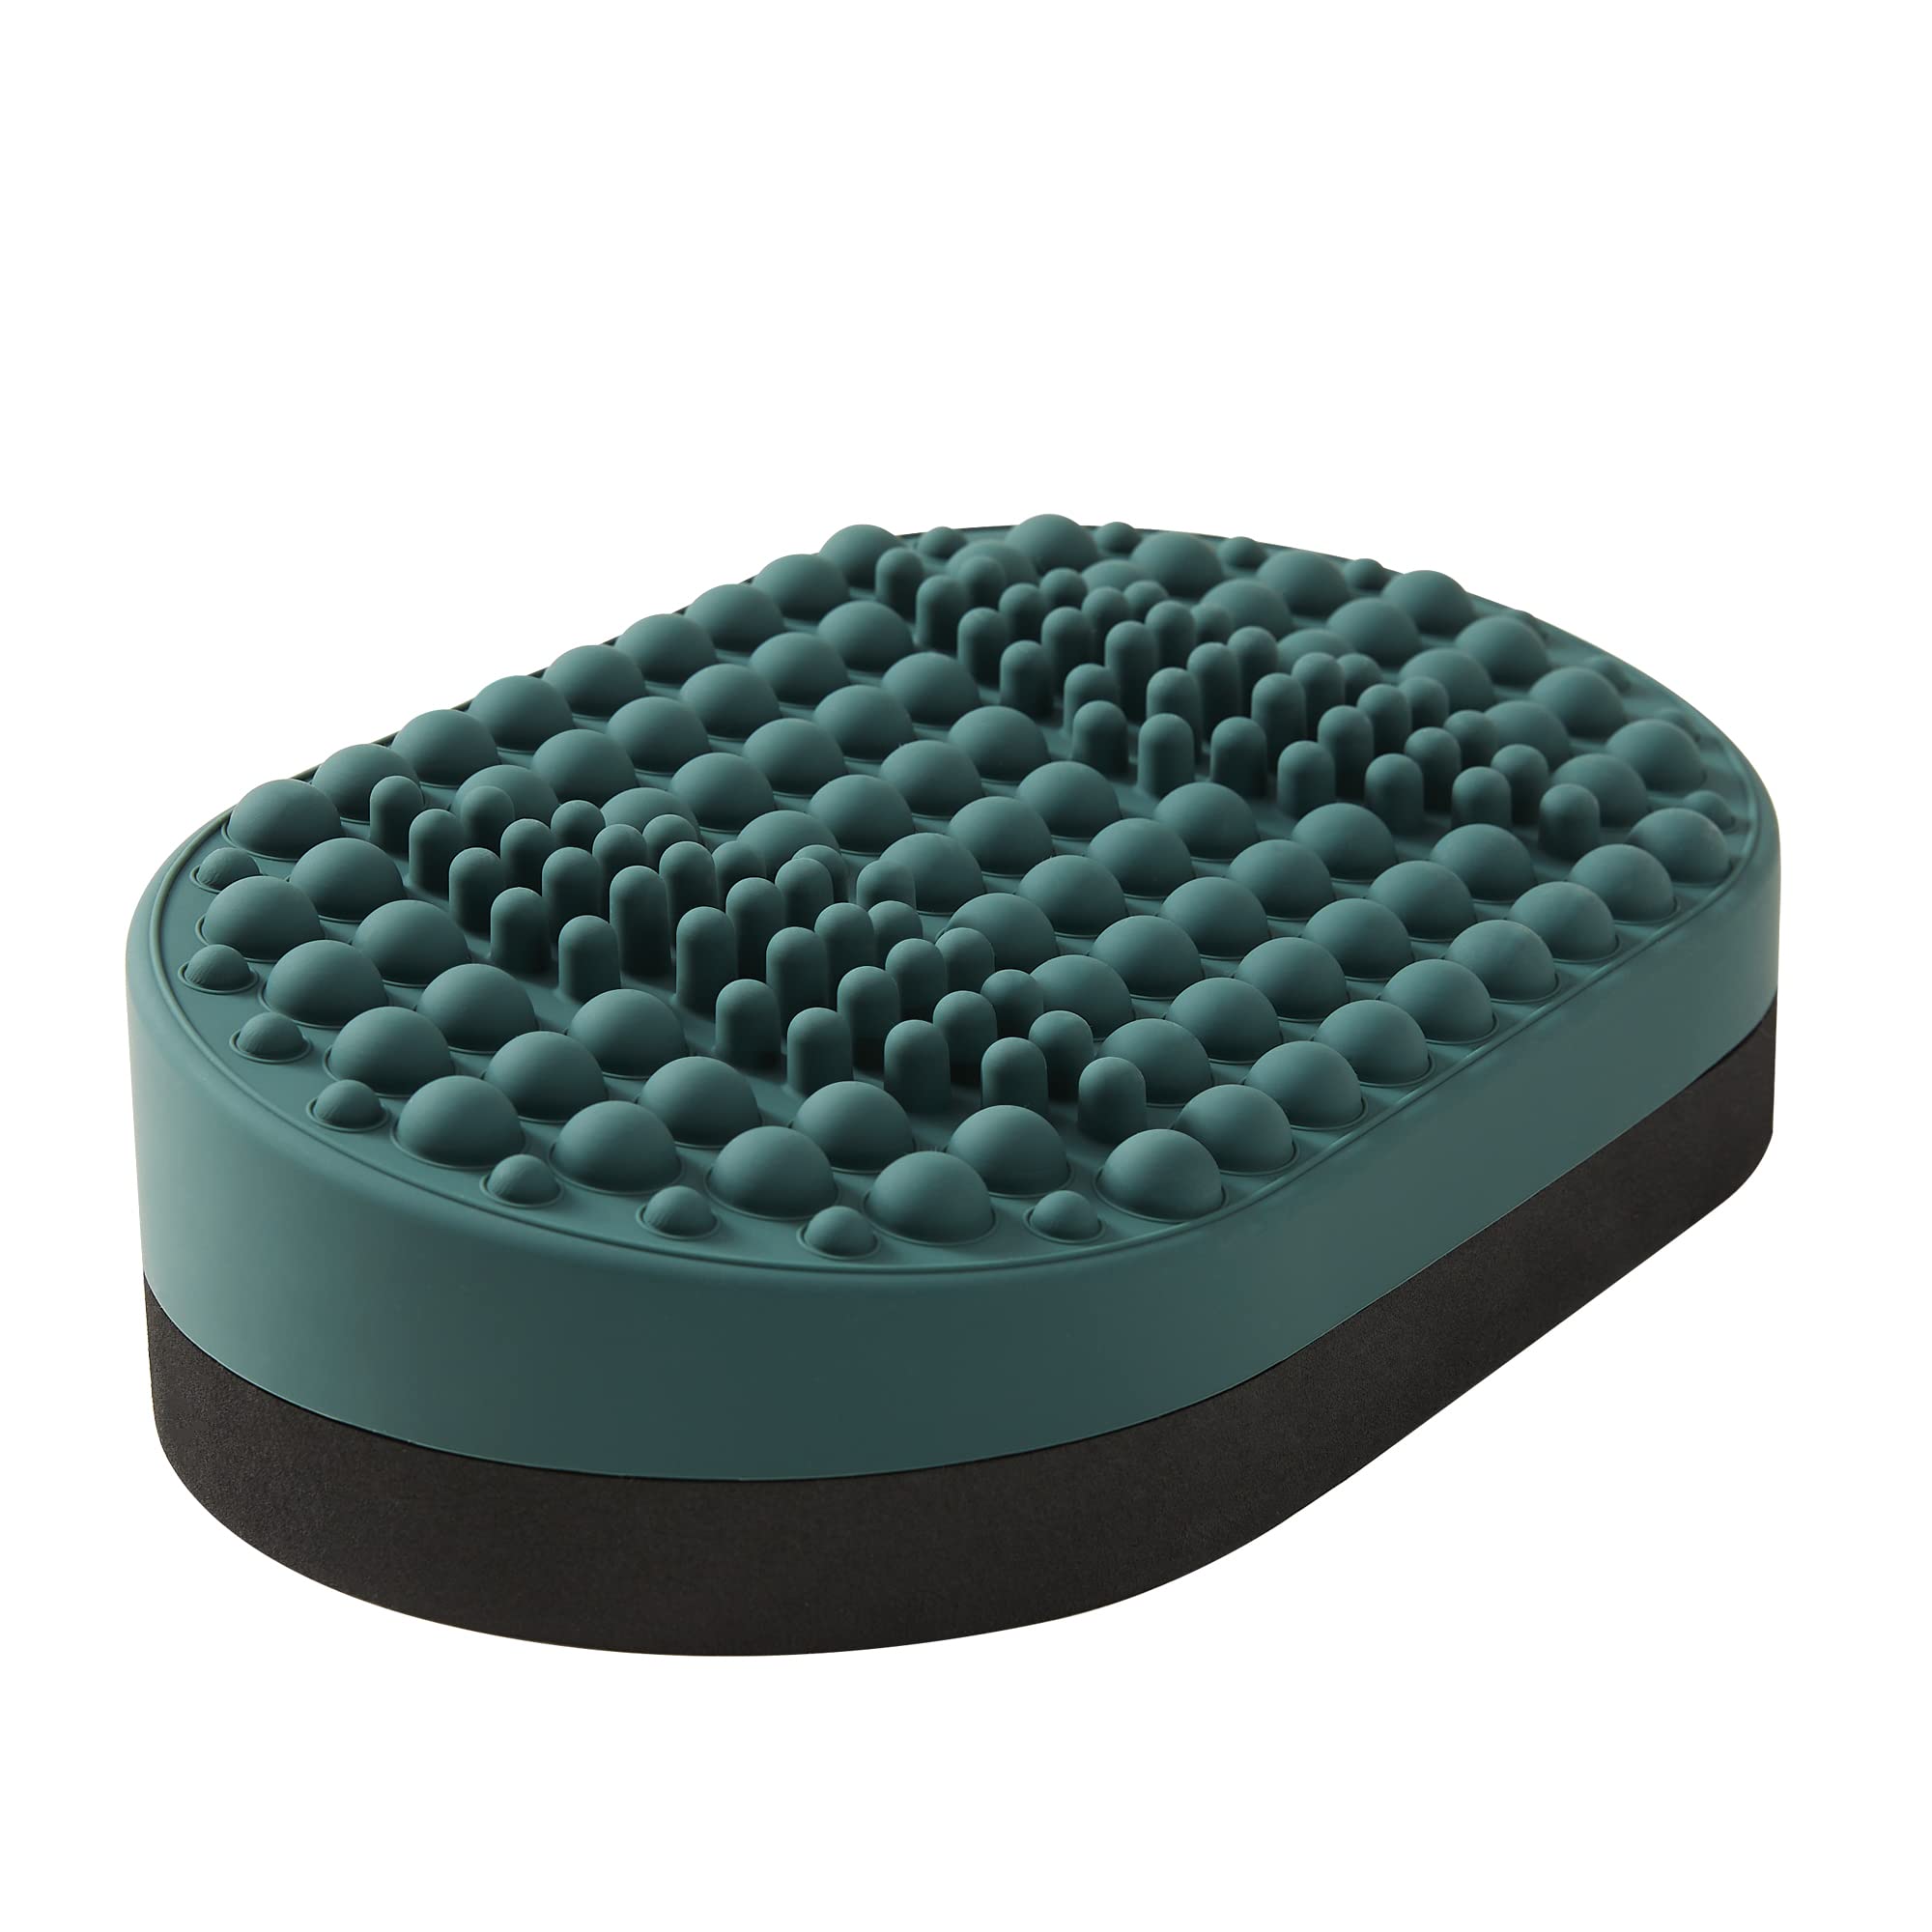 Foot Massager Foot Rest for Under Desk At Work, Home Office Foot Stool for  Plantar Fasciitis Relief, Anti-Fatigue Fidget Toy - AliExpress